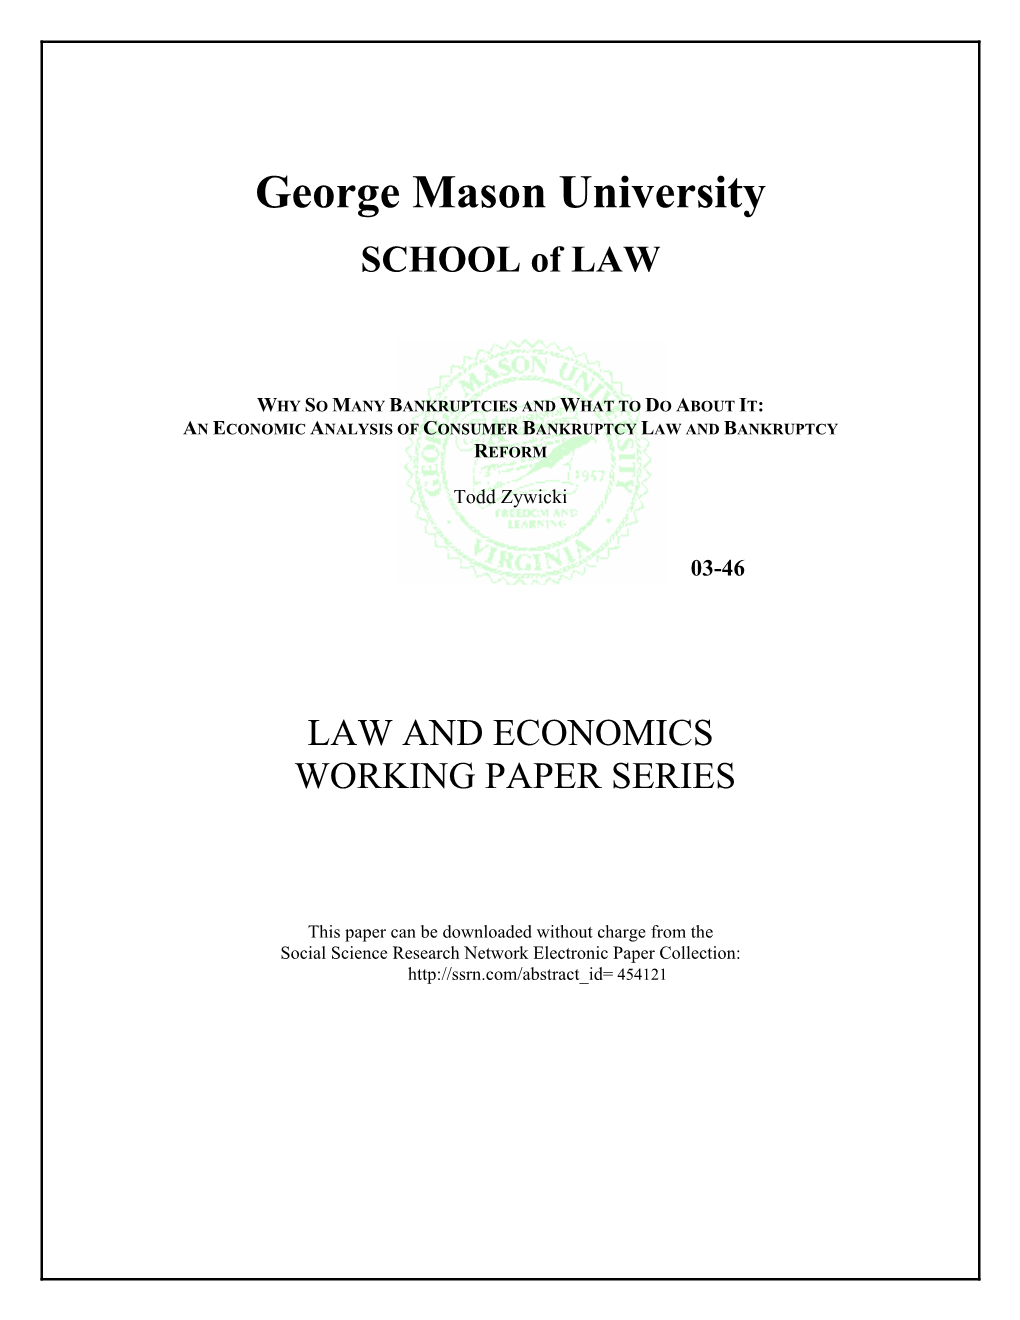 An Economic Analysis of Consumer Bankruptcy Law and Bankruptcy Reform